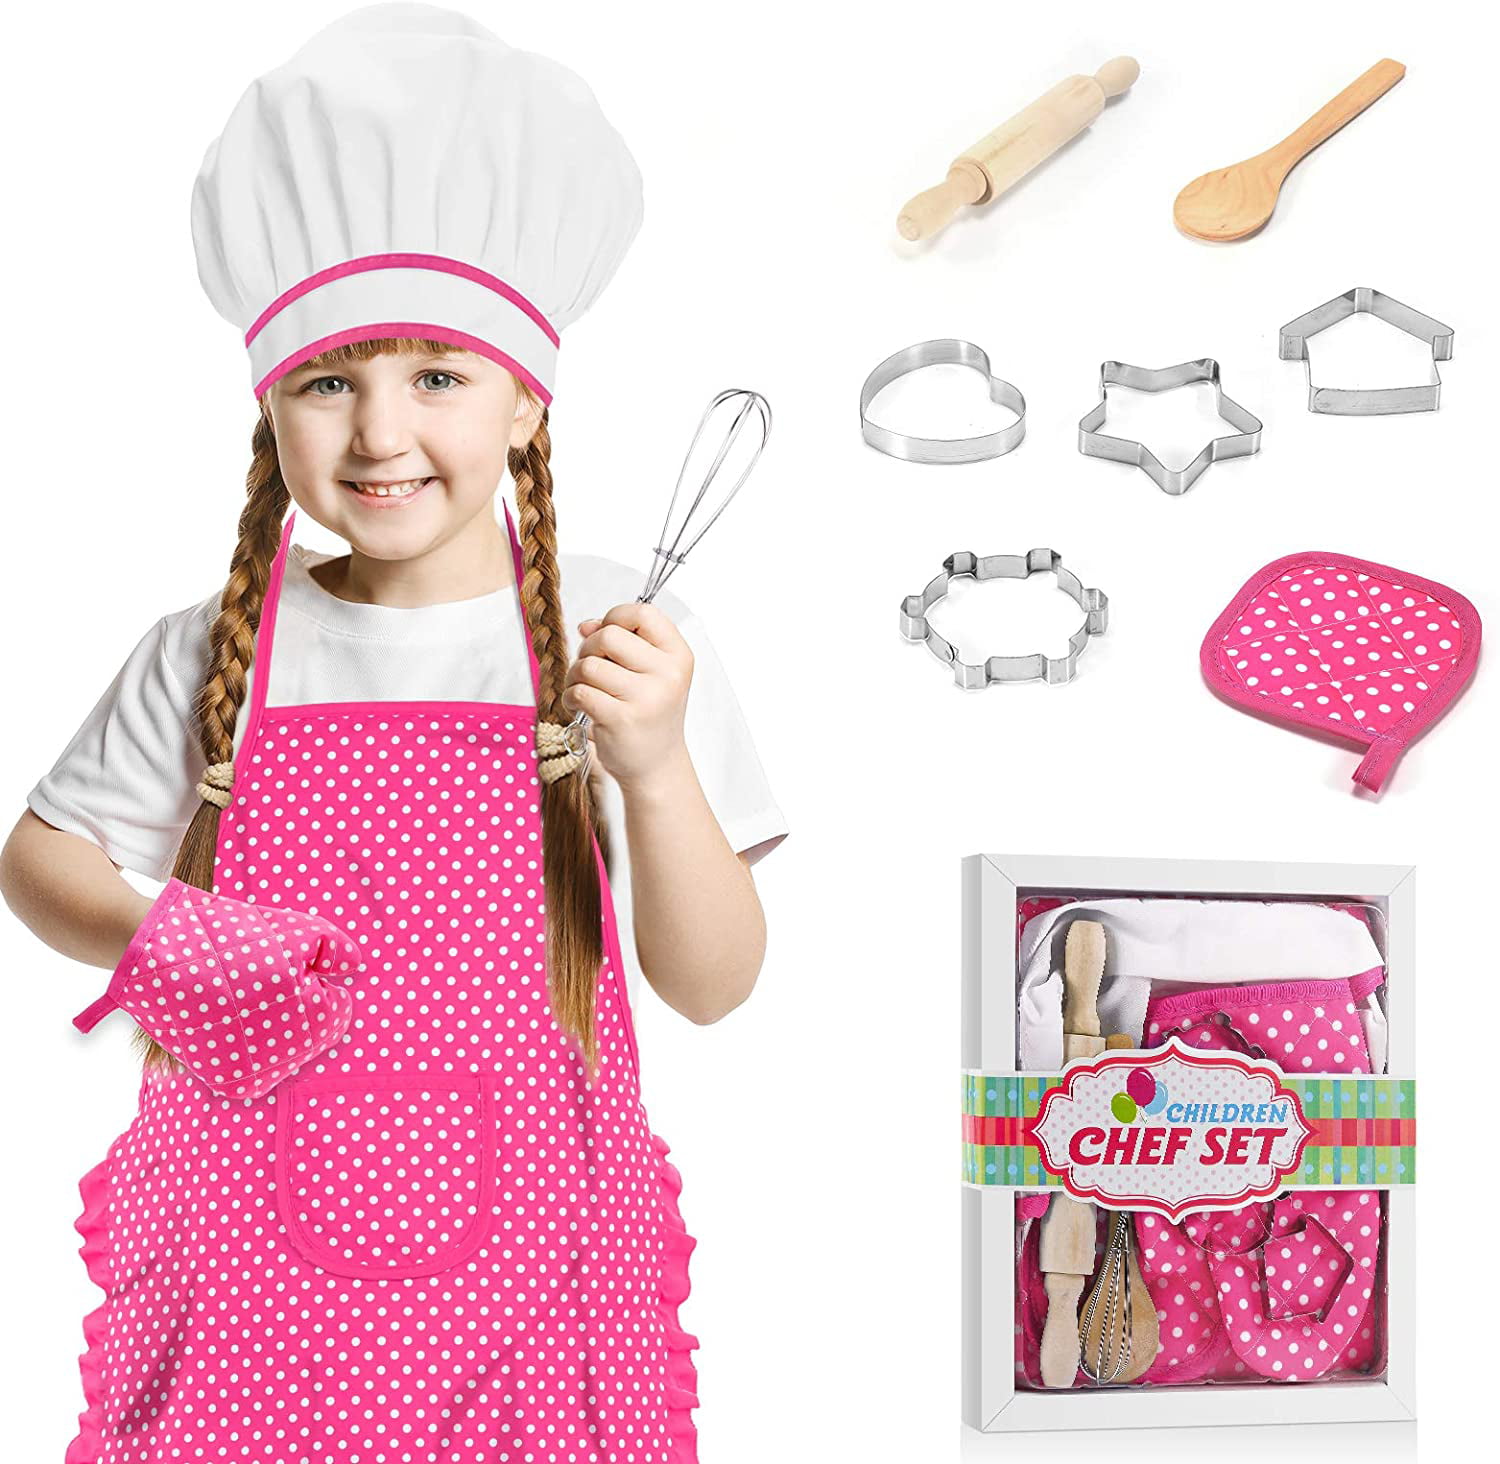 GIRLS HOT PINK WITH POLKA DOTS CHILDRENS 3 PC SET COOKING CHEF HAT APRON & MITT 